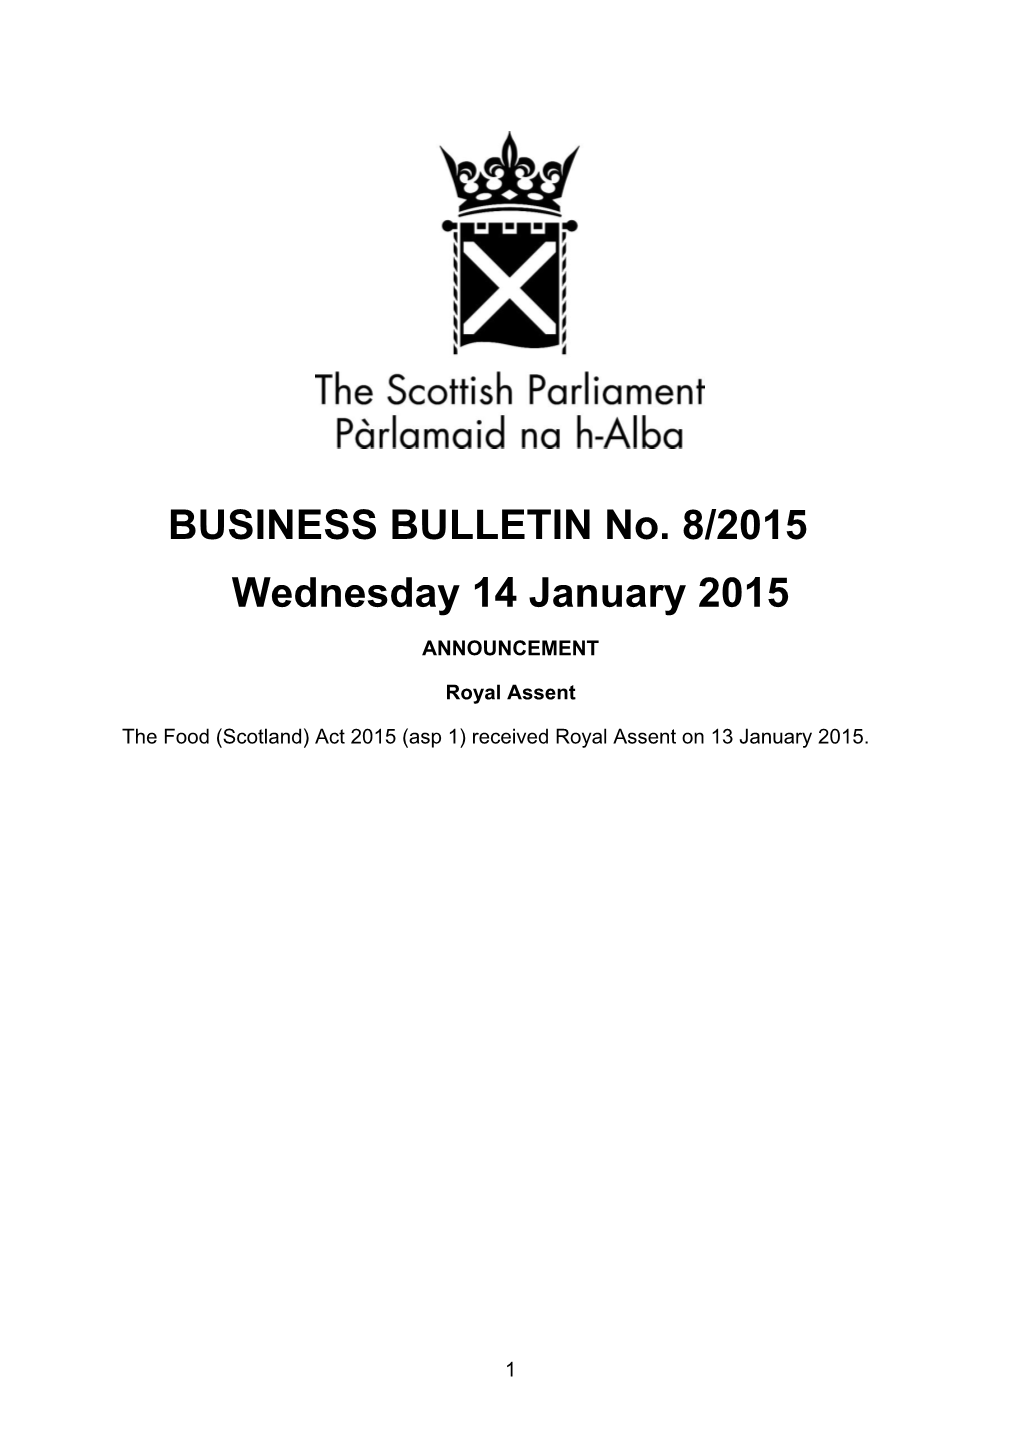 BUSINESS BULLETIN No. 8/2015 Wednesday 14 January 2015 ANNOUNCEMENT